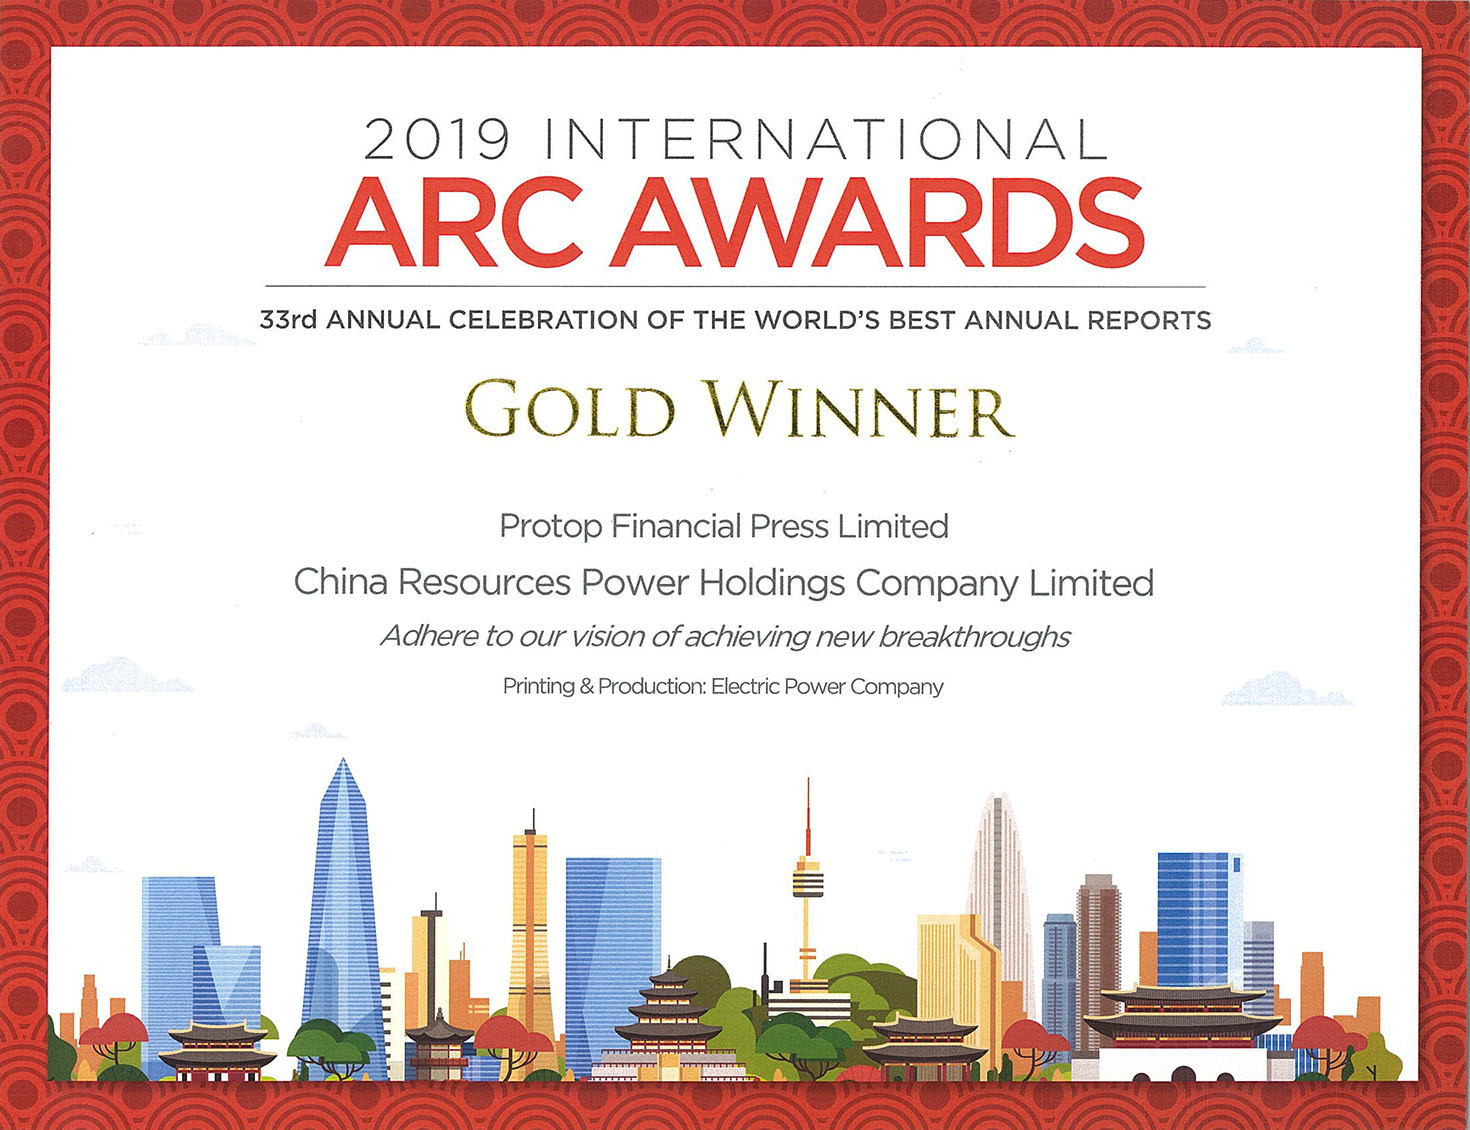 China Resources Power Holdings Company Limited – 2019 ARC AWARDS GOLD WINNER Printing & Production: Electric Power Company